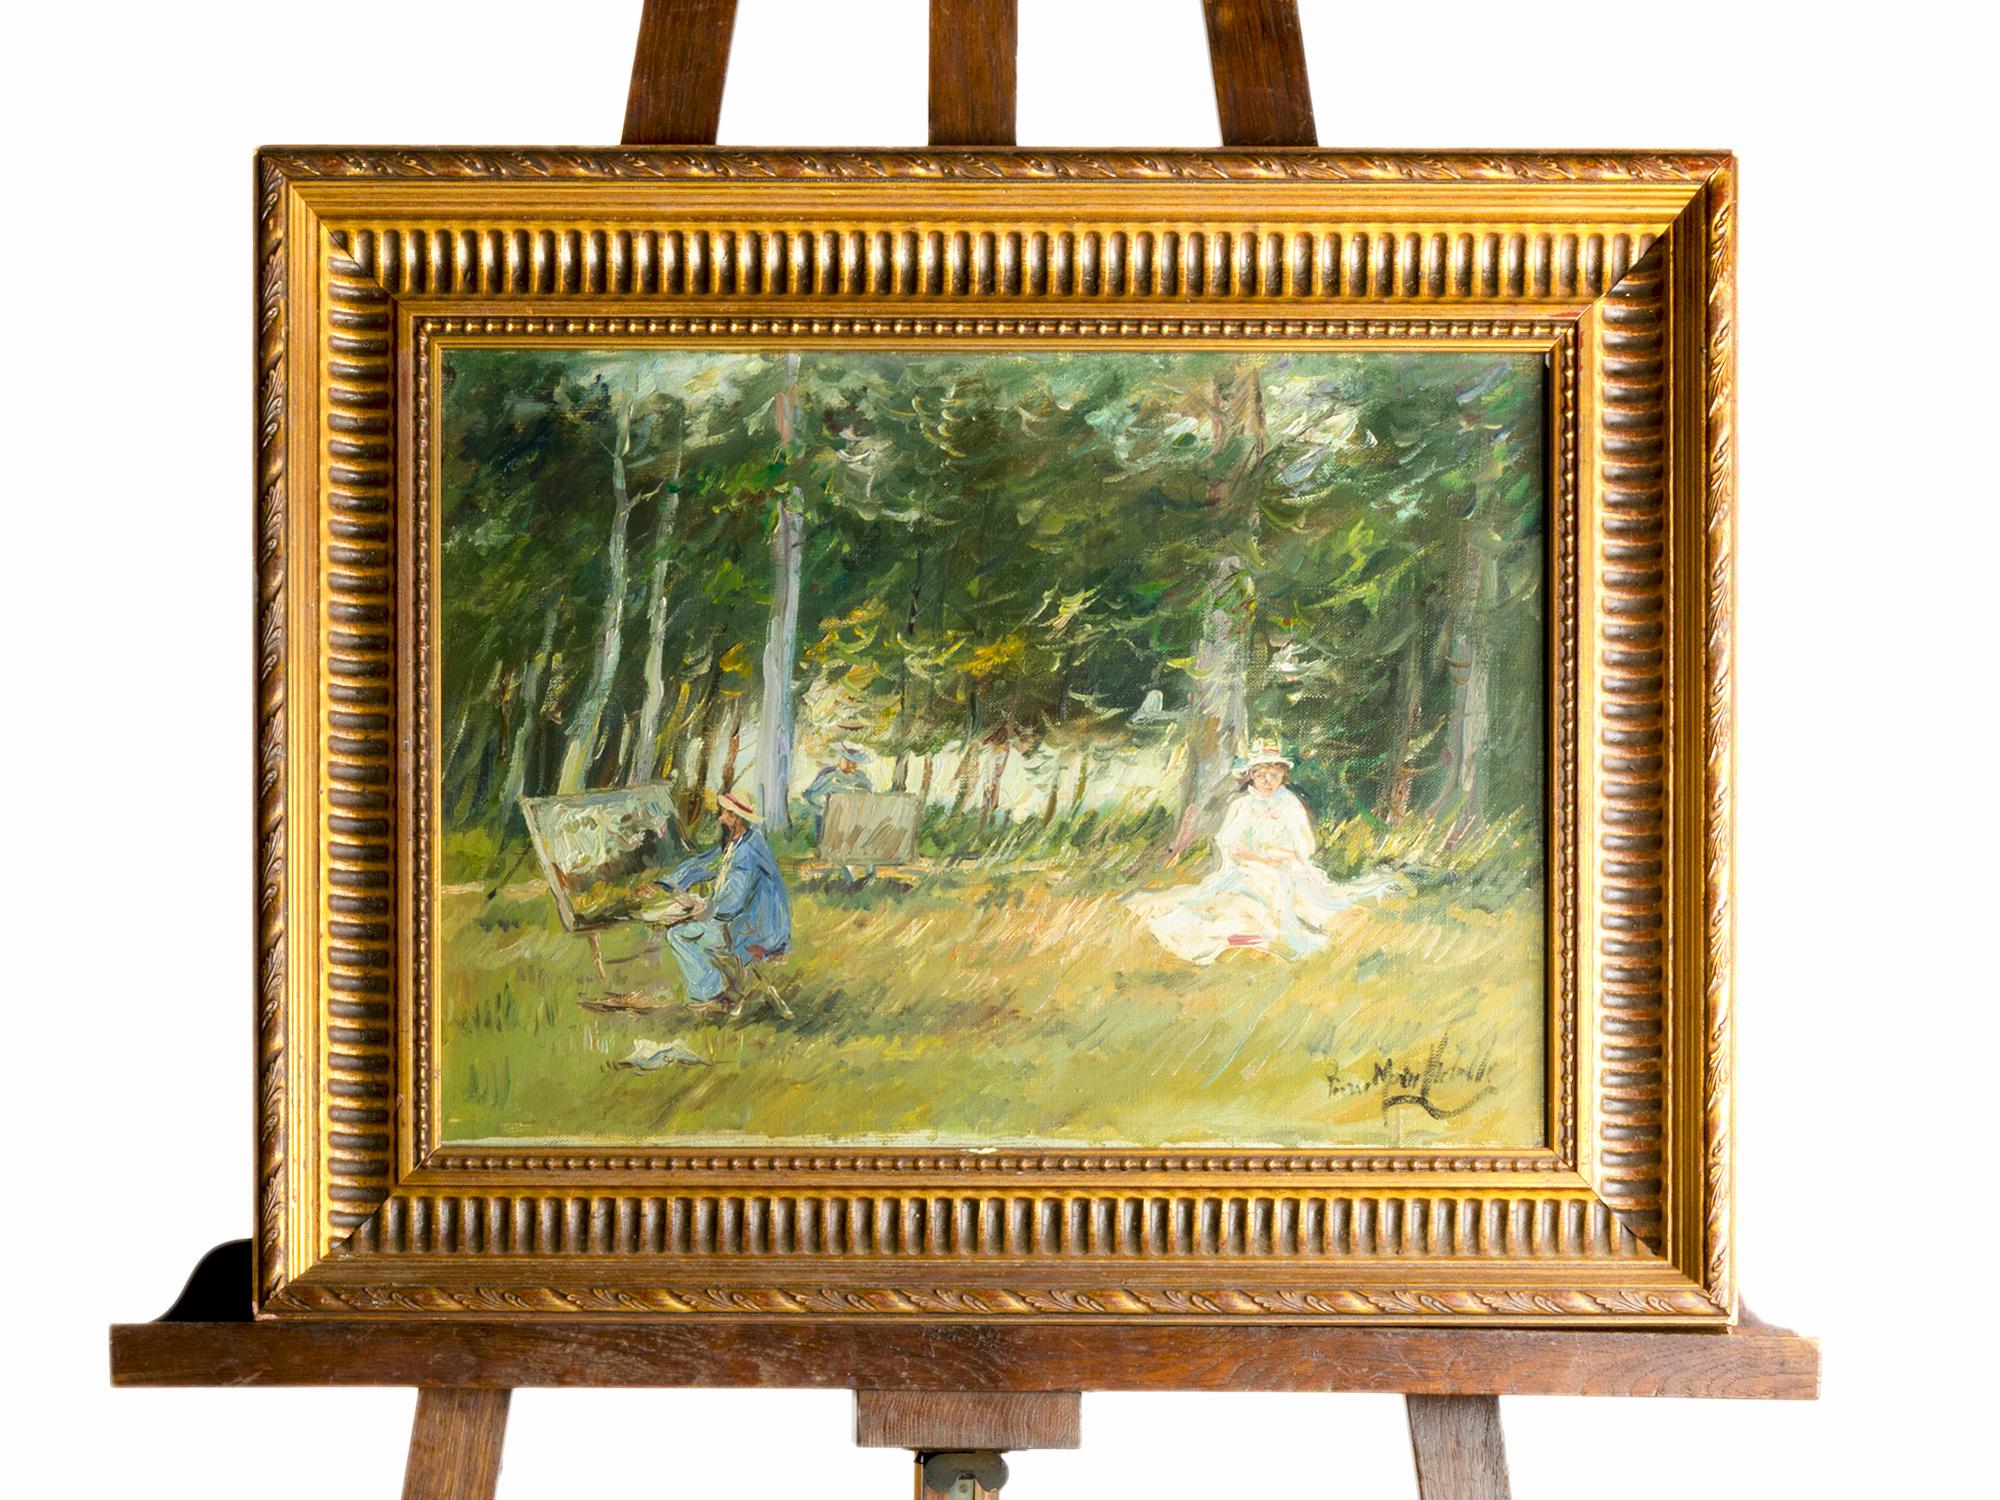 19th Century Painting Scene By  Pierre Morinvidalle , Barbizon Style
4614

A 19th century painting of a bucolic scene in the woods with an old painter painting a lady on an easel, signed 'Pierre Morinville`.
Frame 61 x 47 cm 
Canvas 46 x 33.5 cm
